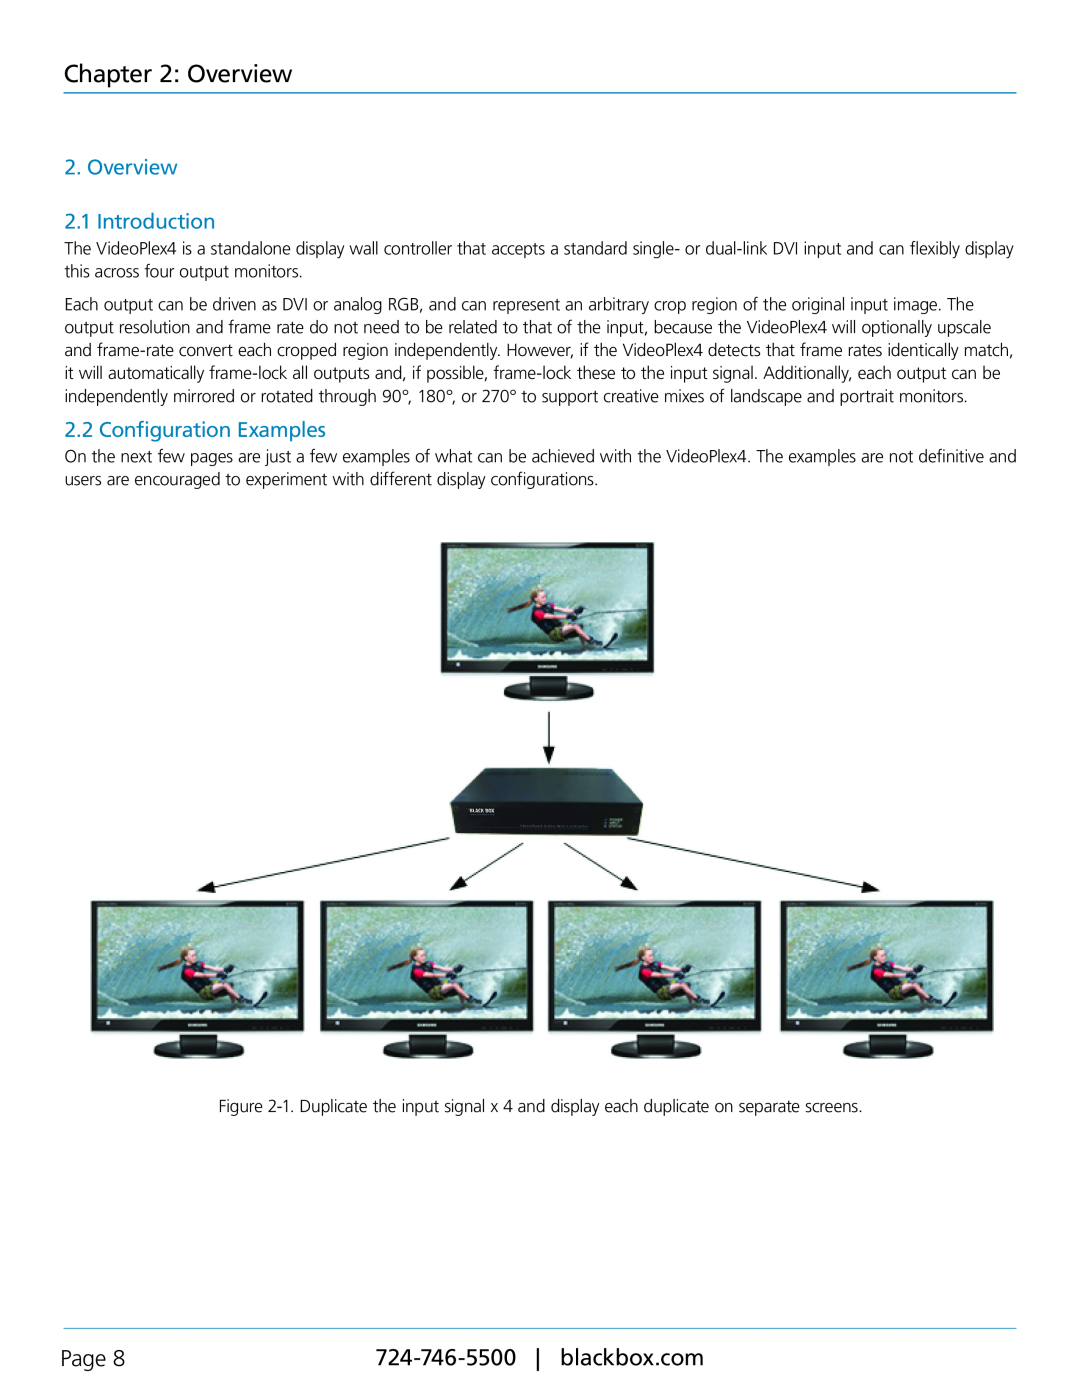 Black Box VSC-VPLEX4, VideoPlex4 Video Wall Controller manual Overview 2.1 Introduction, Configuration Examples, Page 